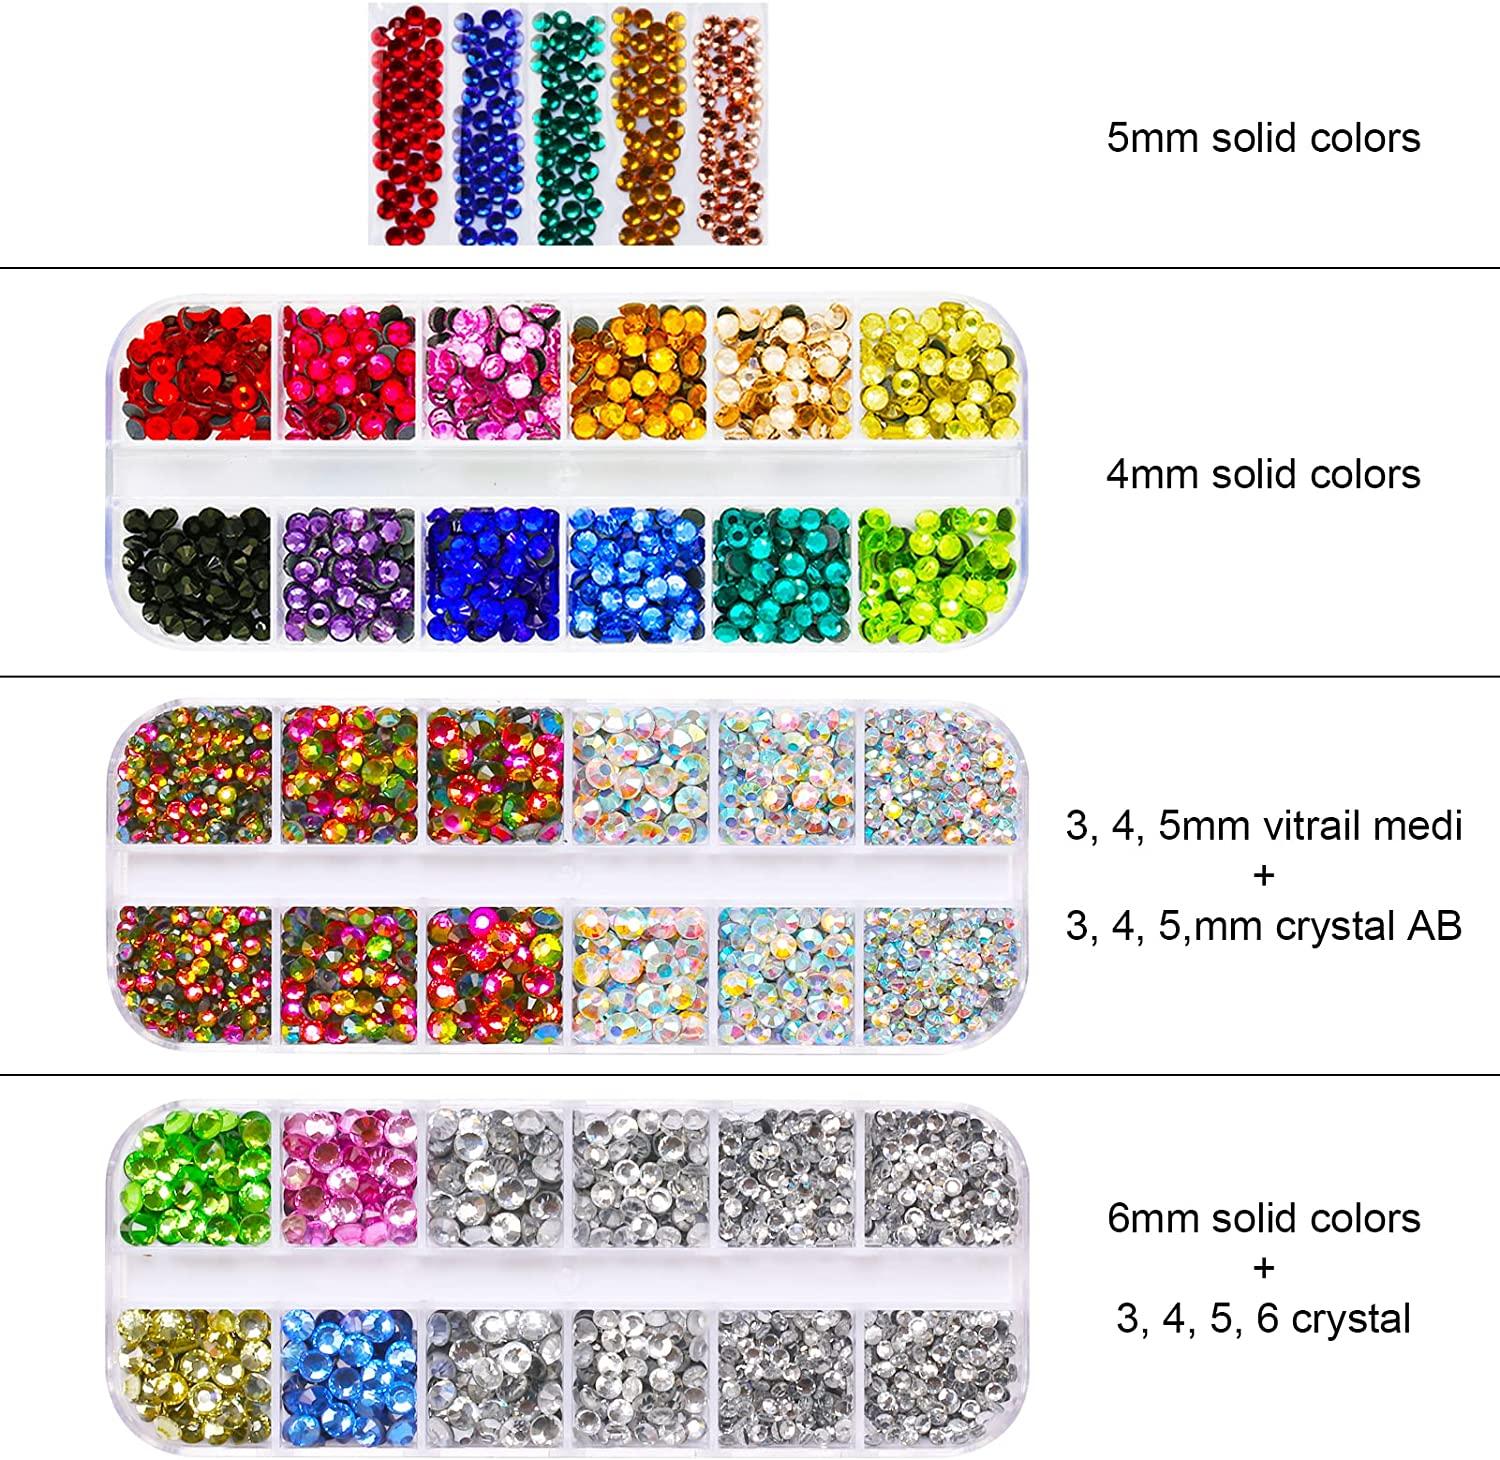 Worthofbest Bedazzler Kit with Rhinestones and Glue for Crafts